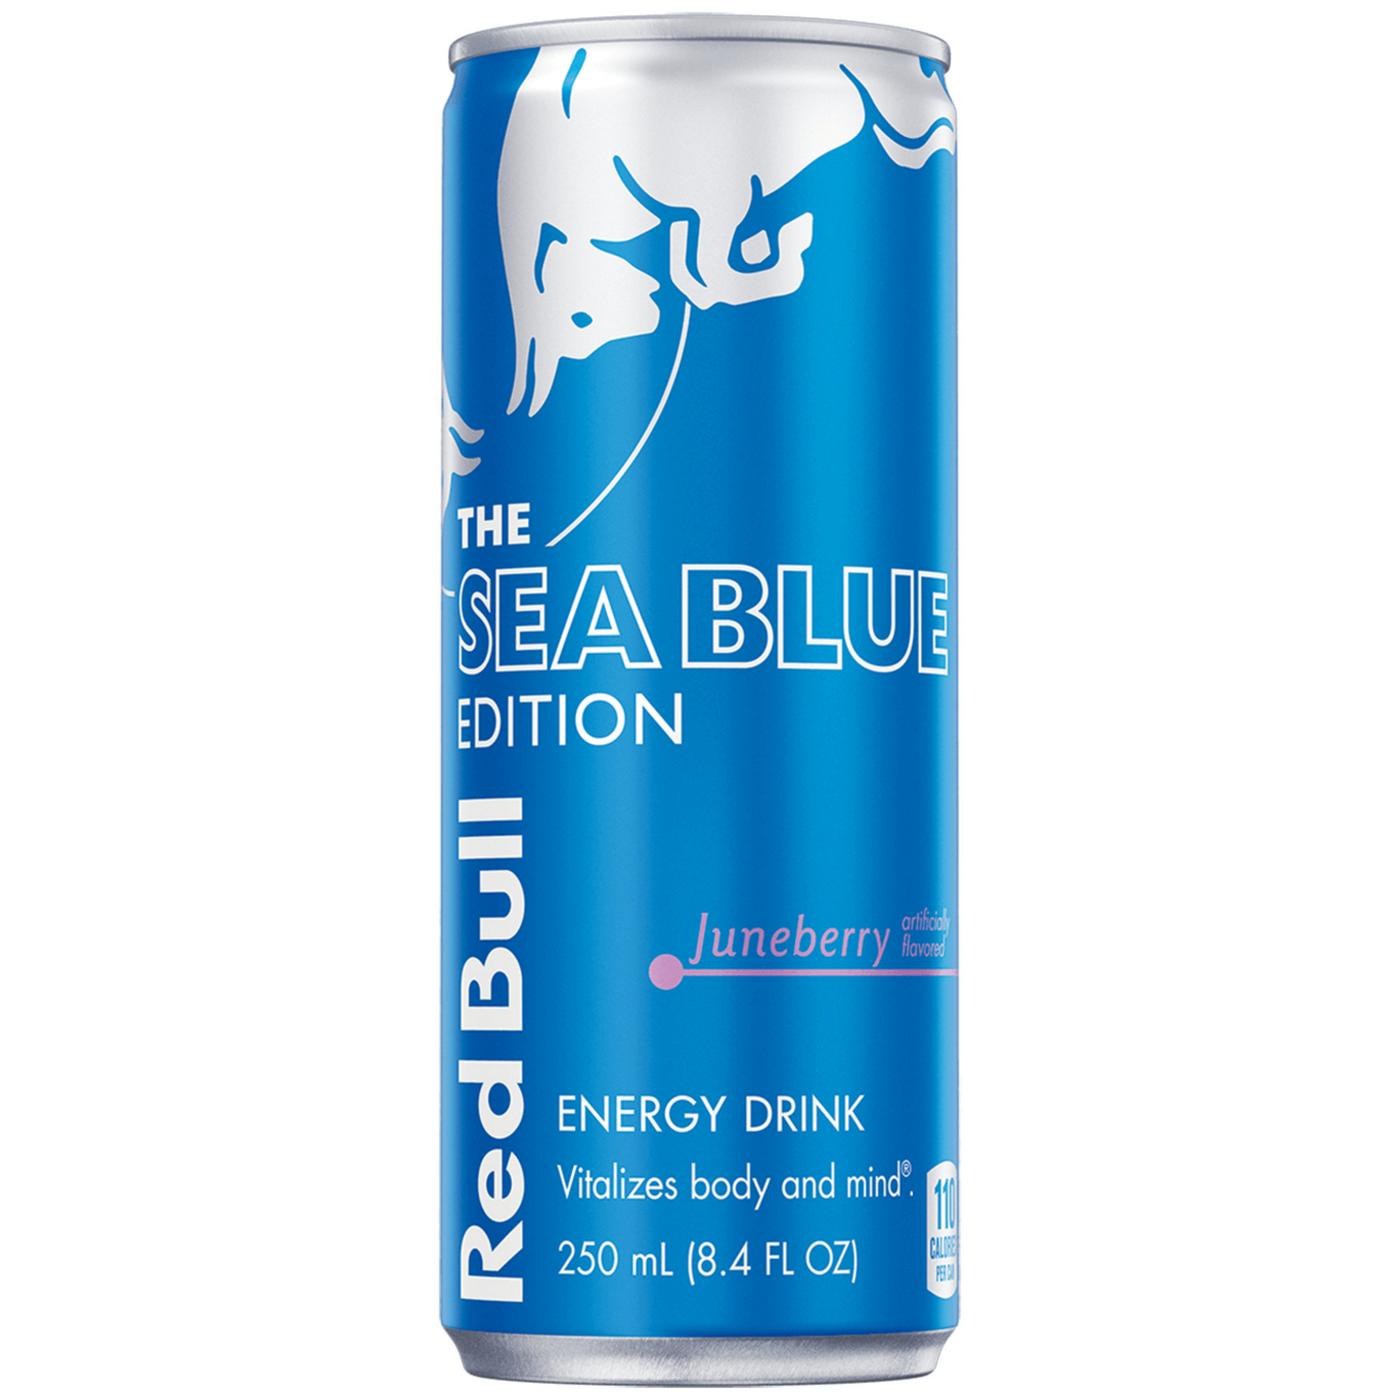 Red Bull Sea Blue Edition Juneberry Energy Drink; image 1 of 4